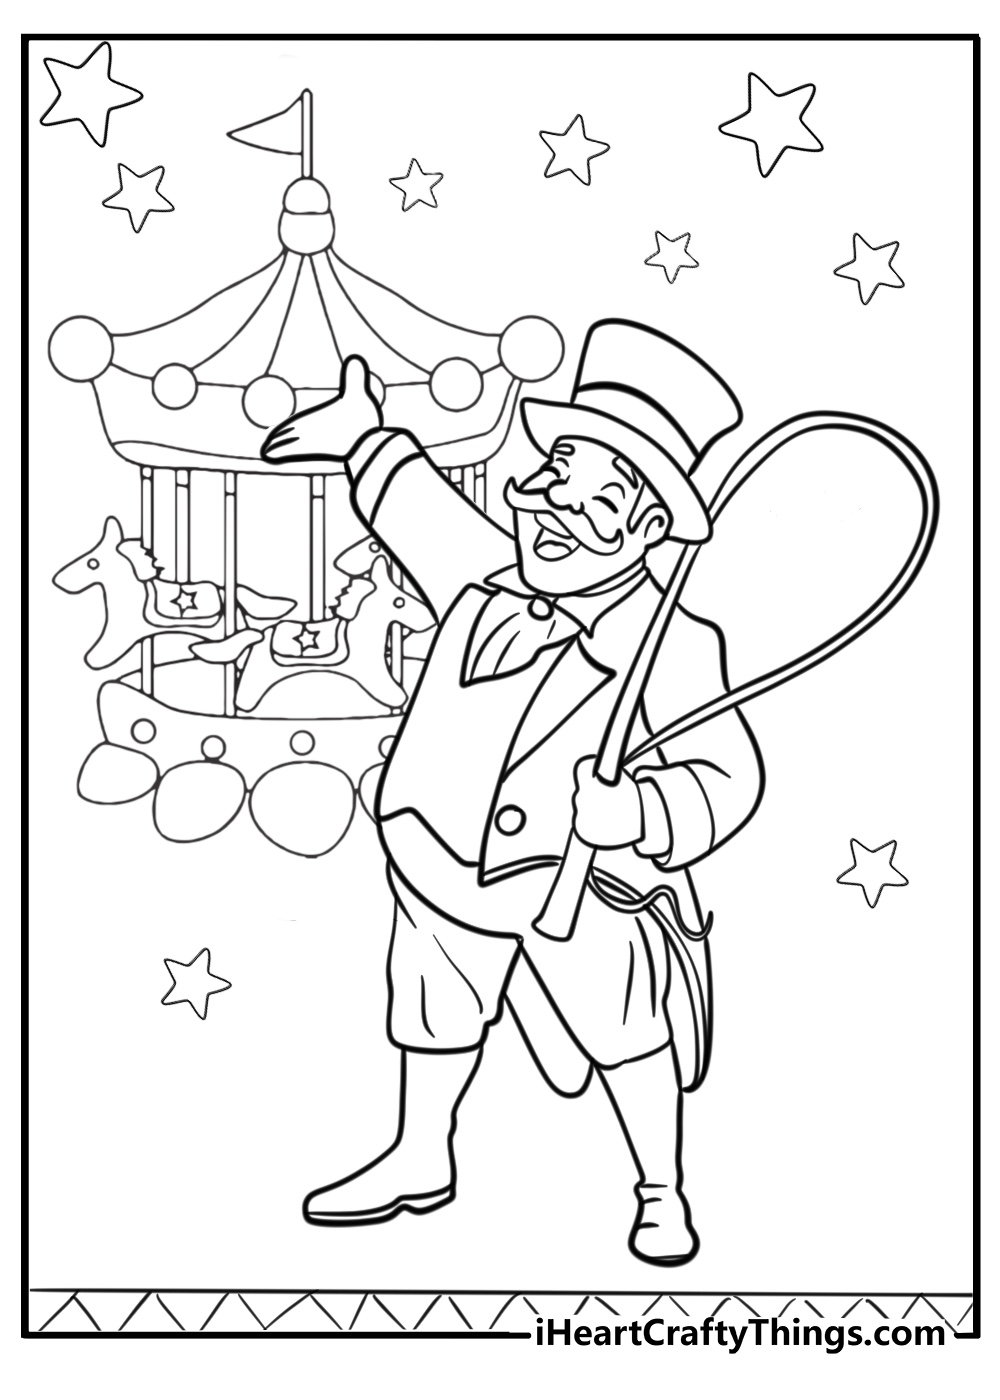 Circus coloring page of ringmaster holding whip and burning ring